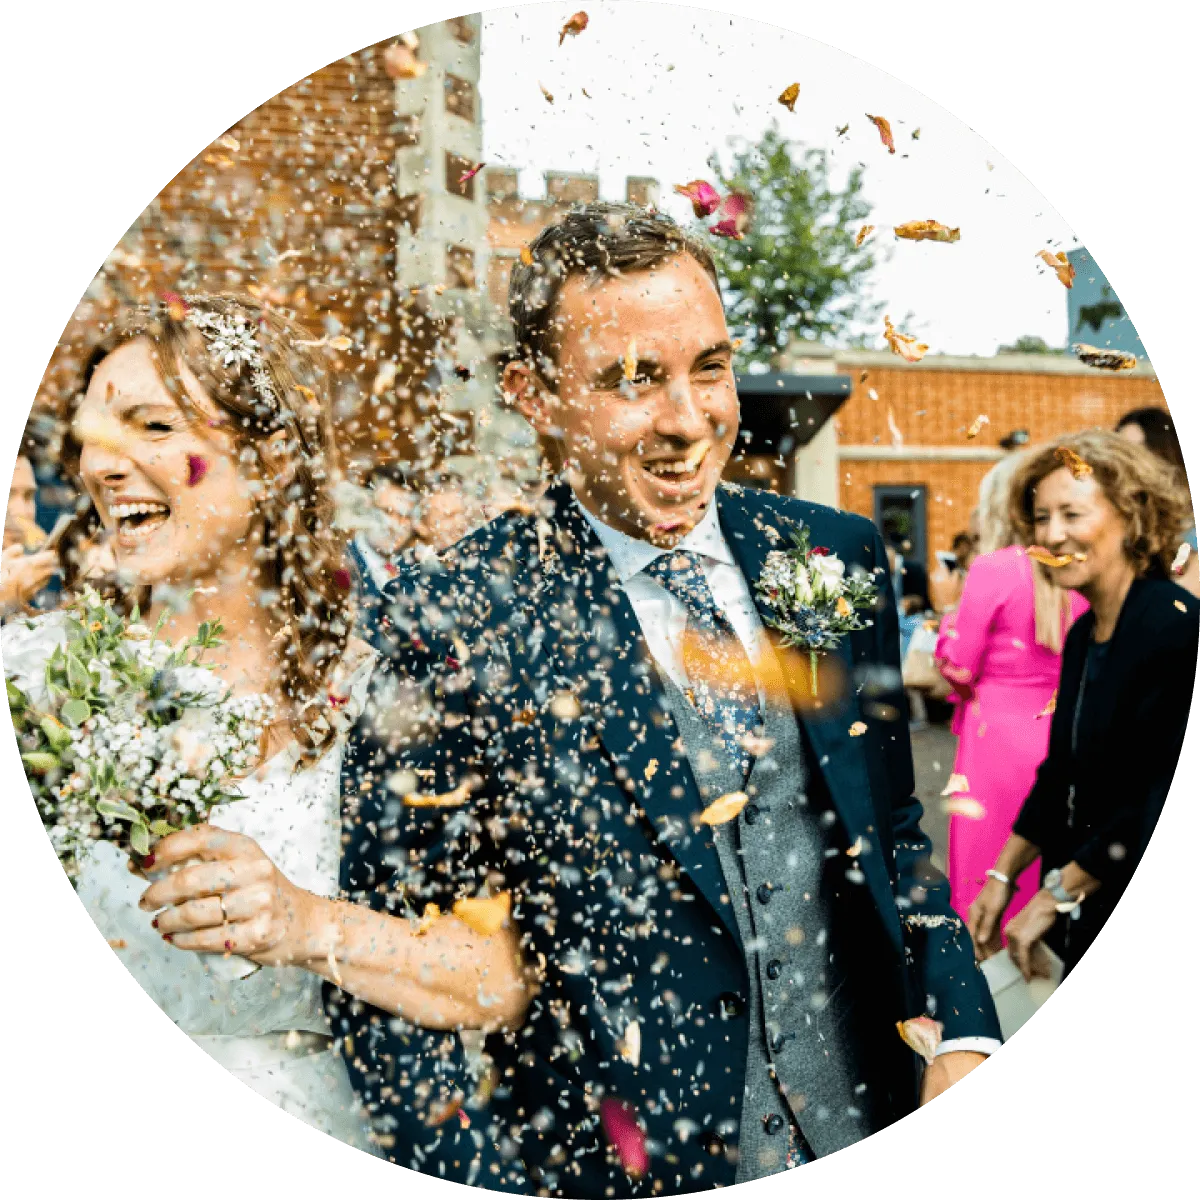 Image of wedding couple after ceremony with confetti. Image courtesy of Farlie Photography